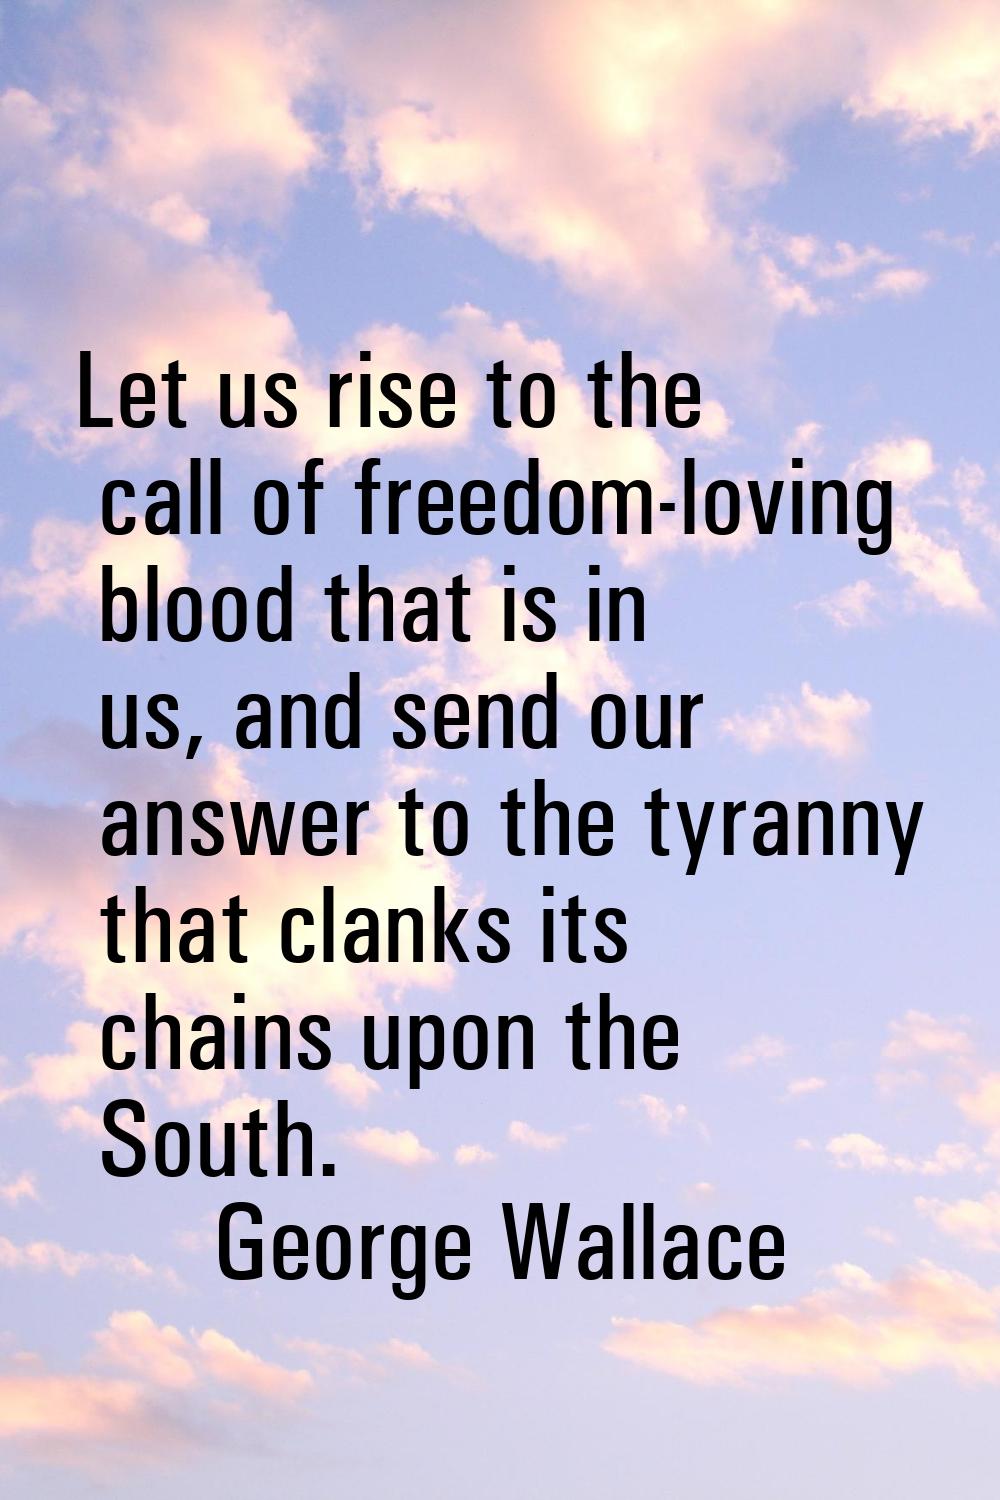 Let us rise to the call of freedom-loving blood that is in us, and send our answer to the tyranny t